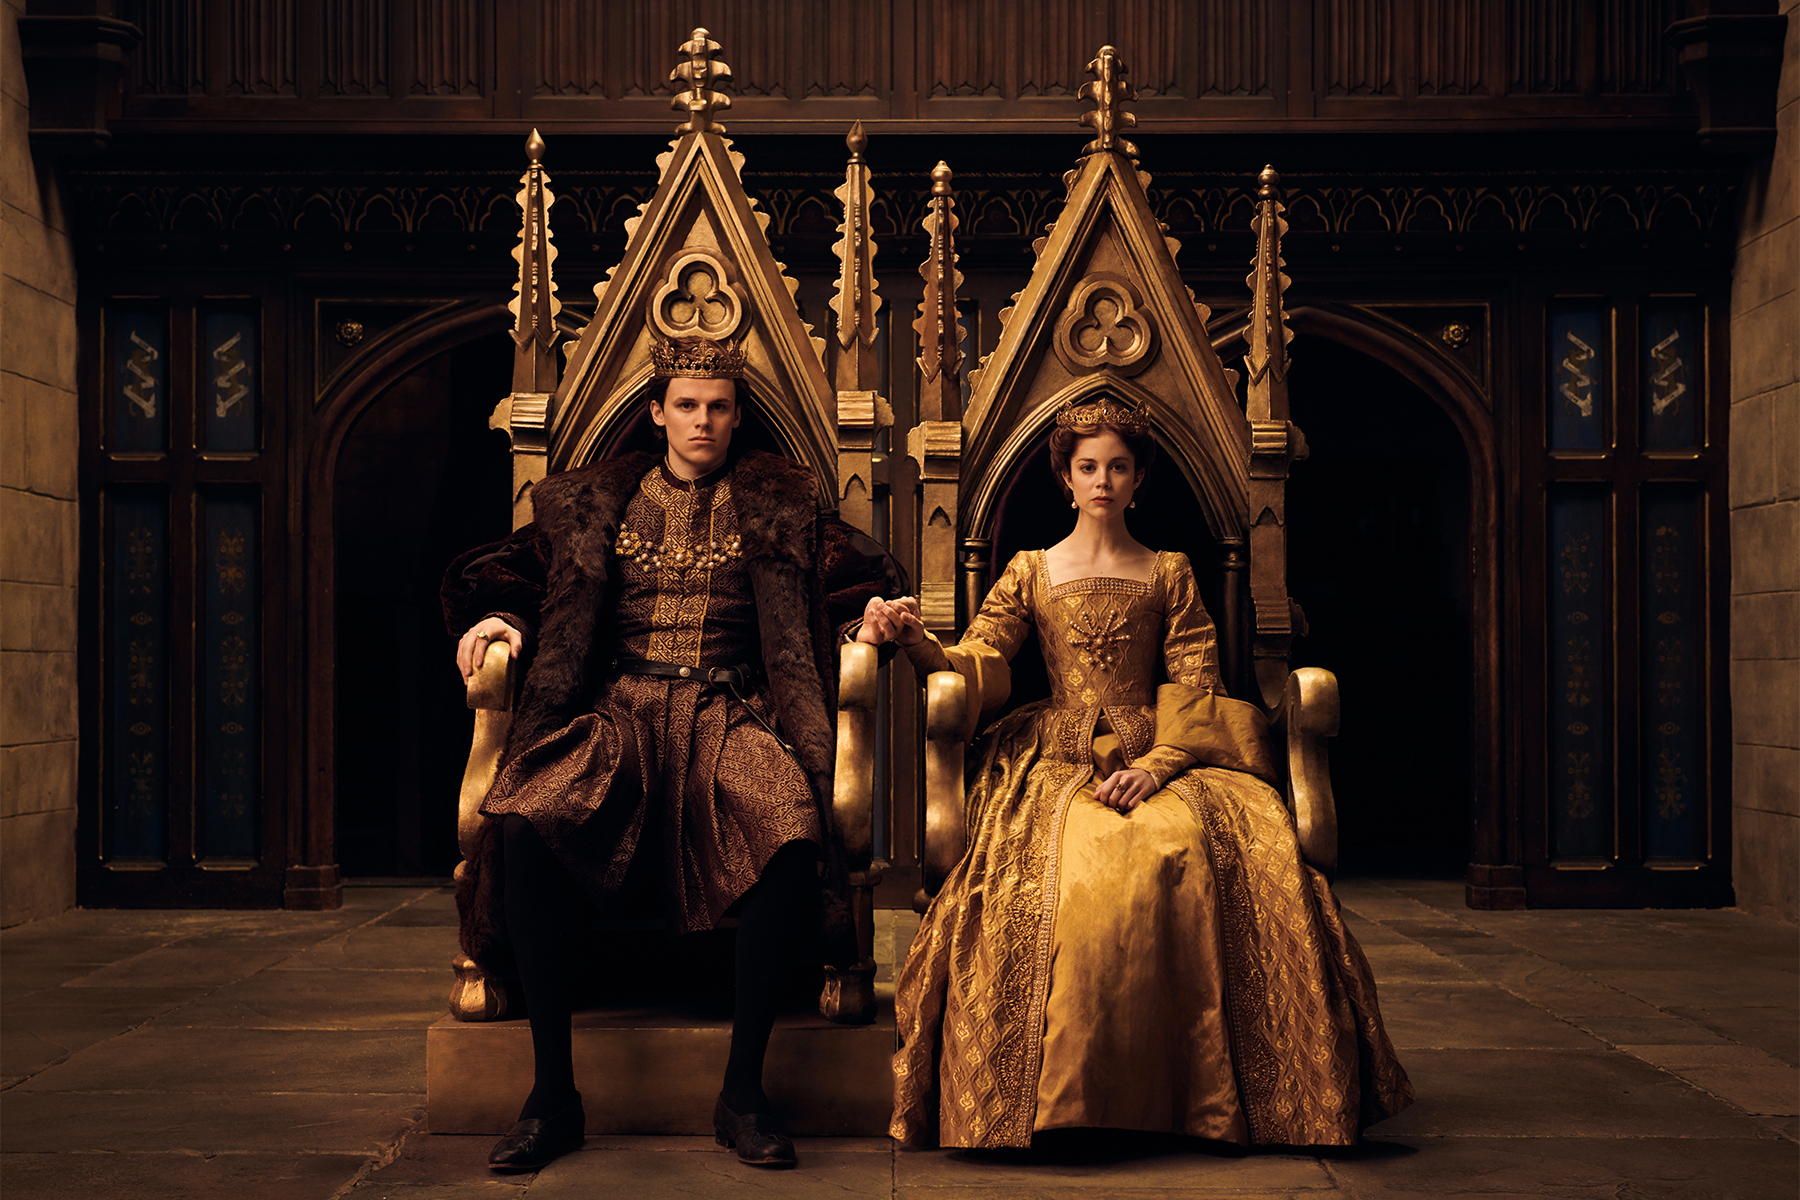 Henry and Catherine sitting on thrones